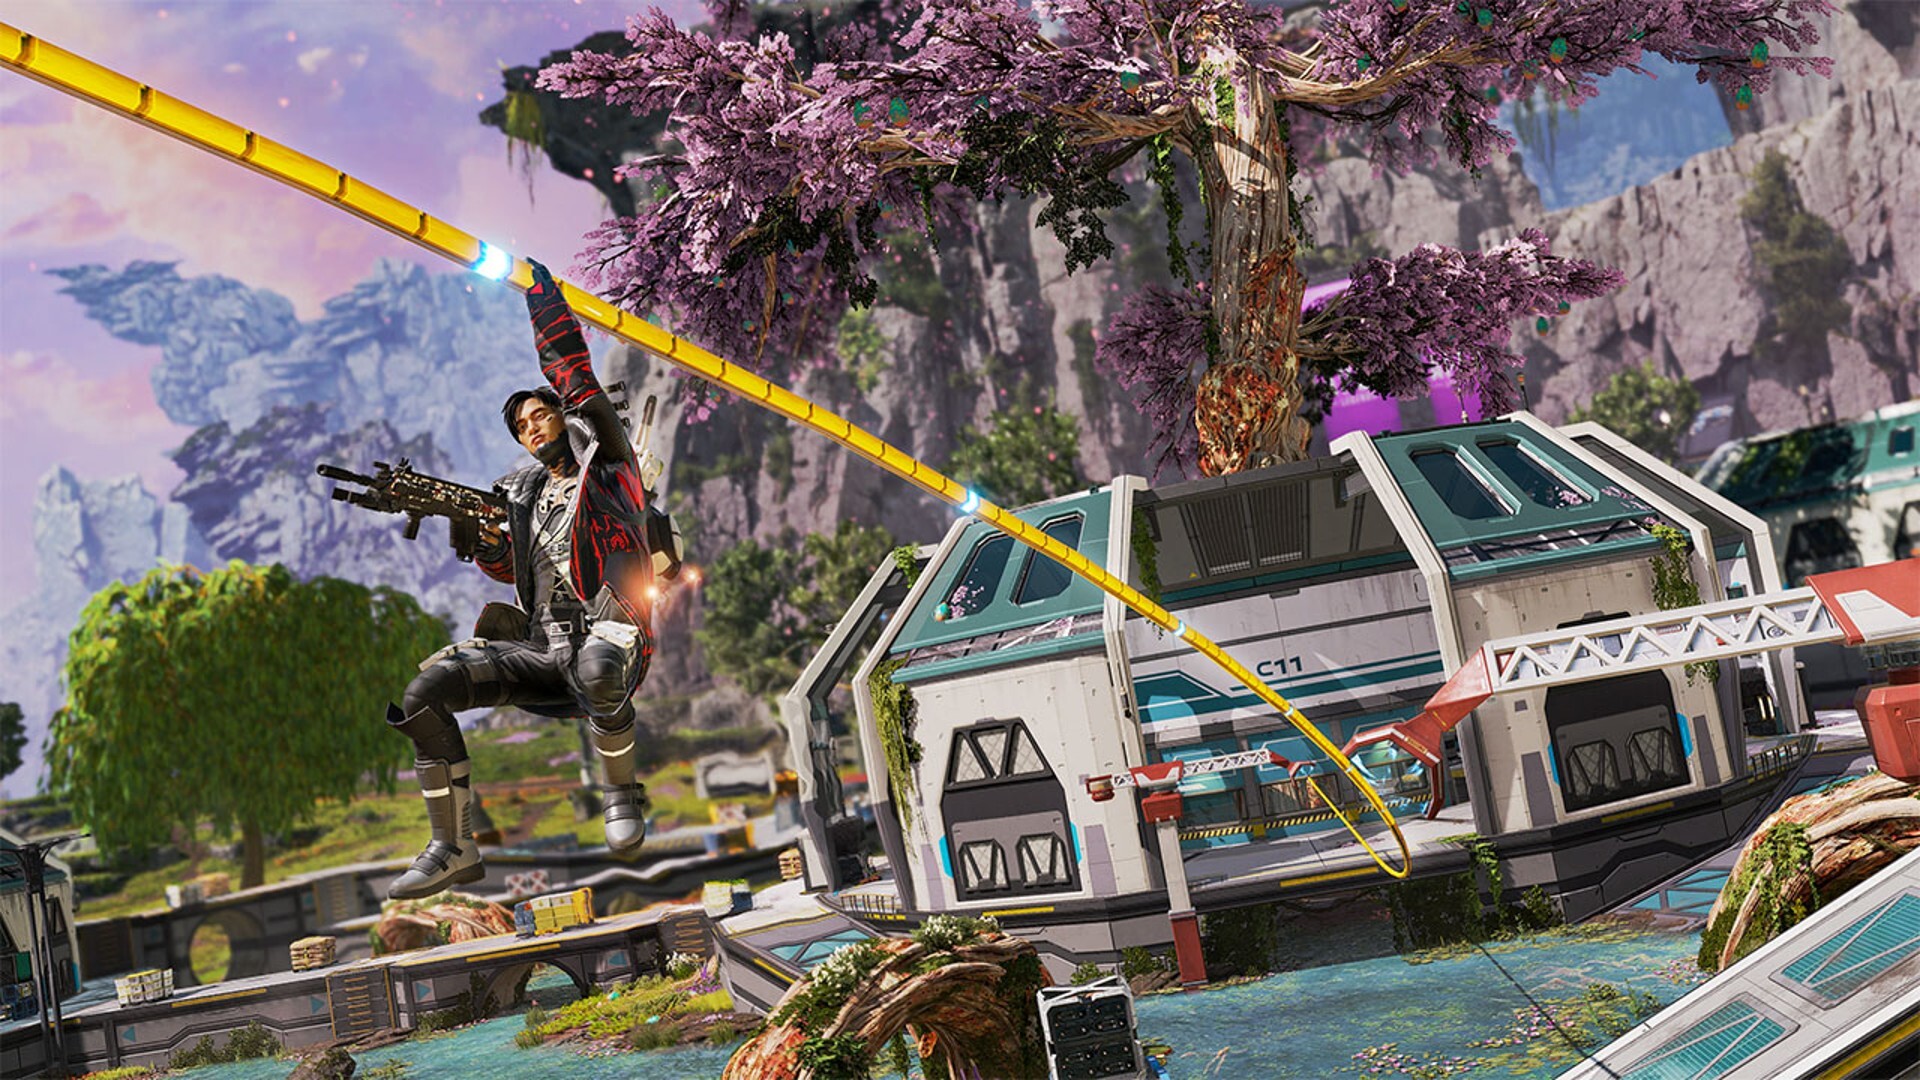 Best Switch FPS games: a player goes down the zipline in Apex legends